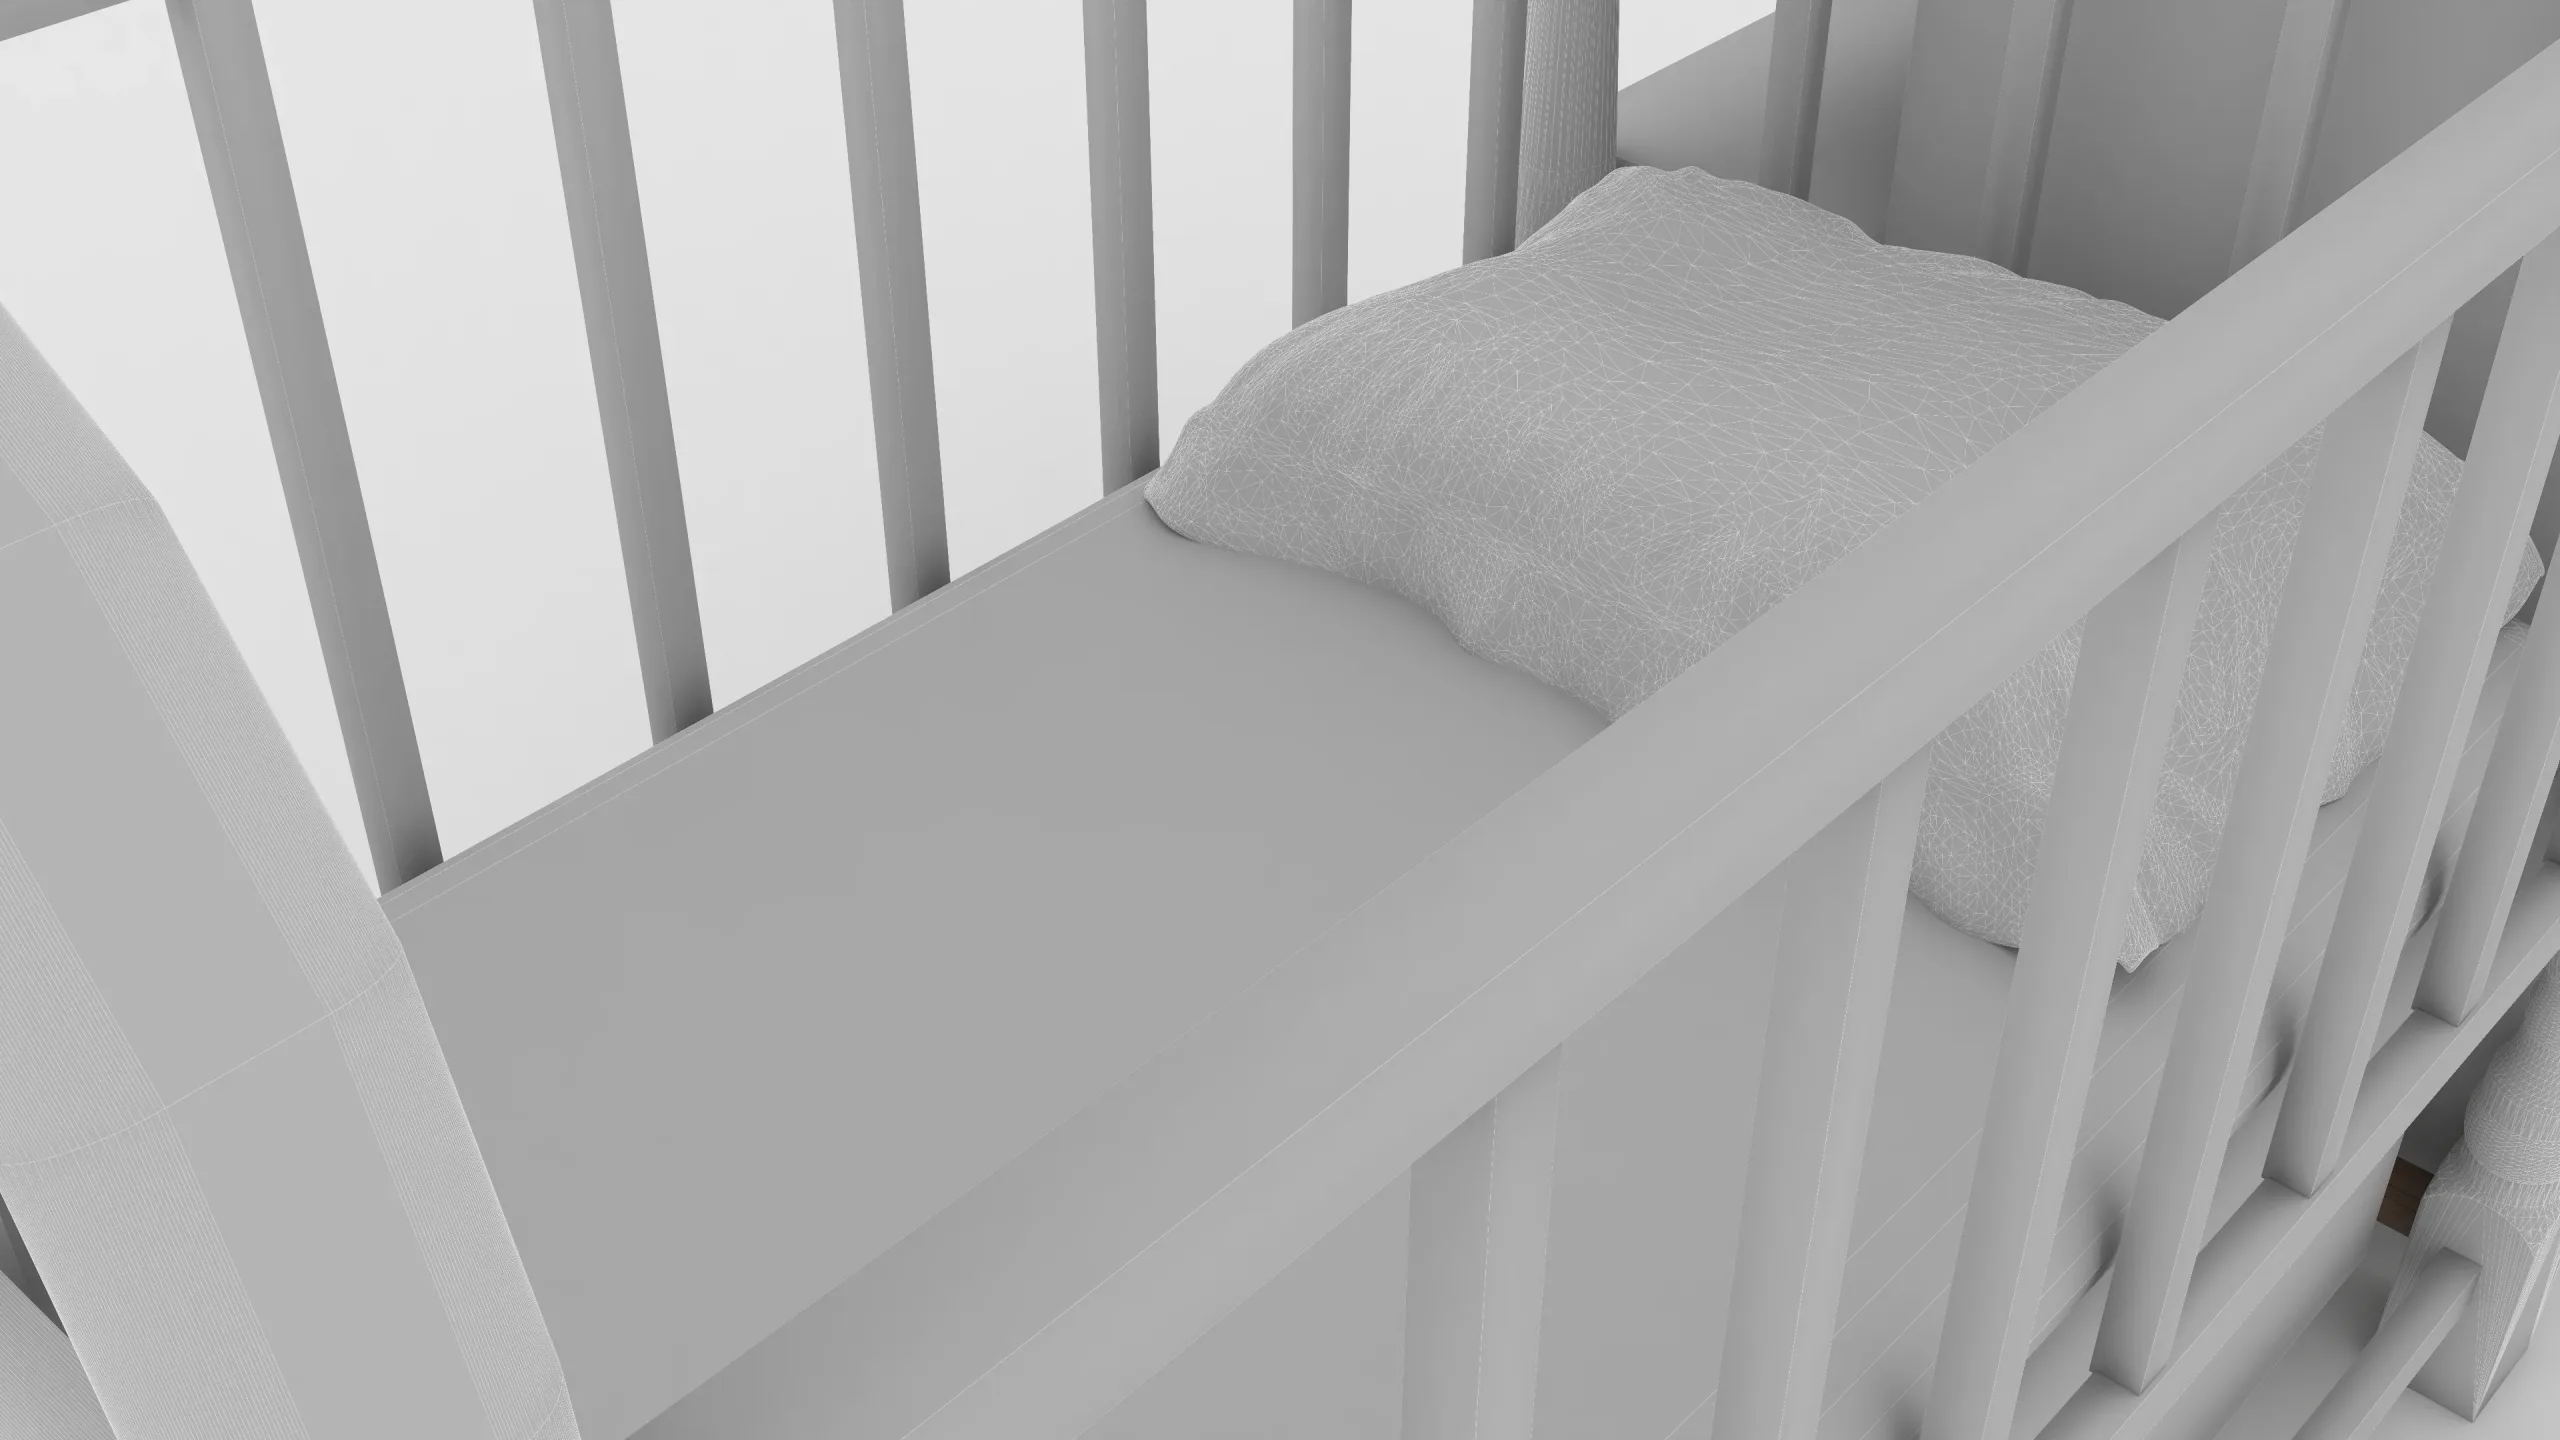 Baby Bed 2